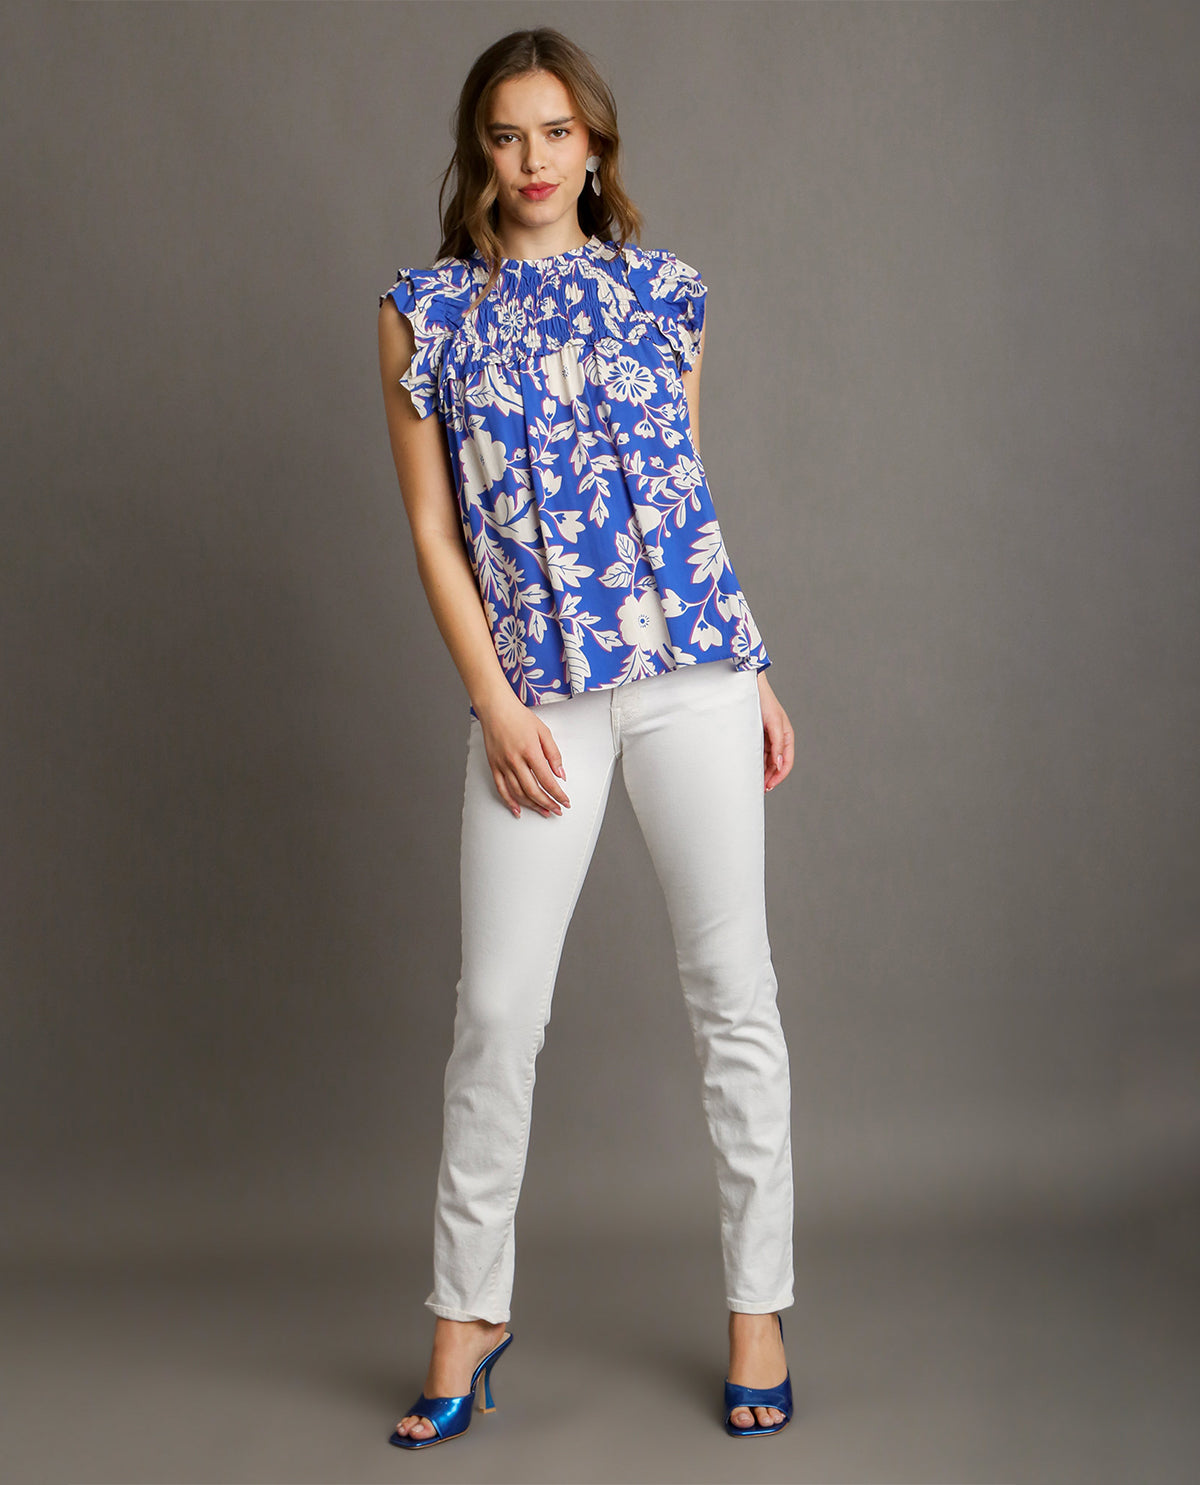 Two Tone Floral Print Top